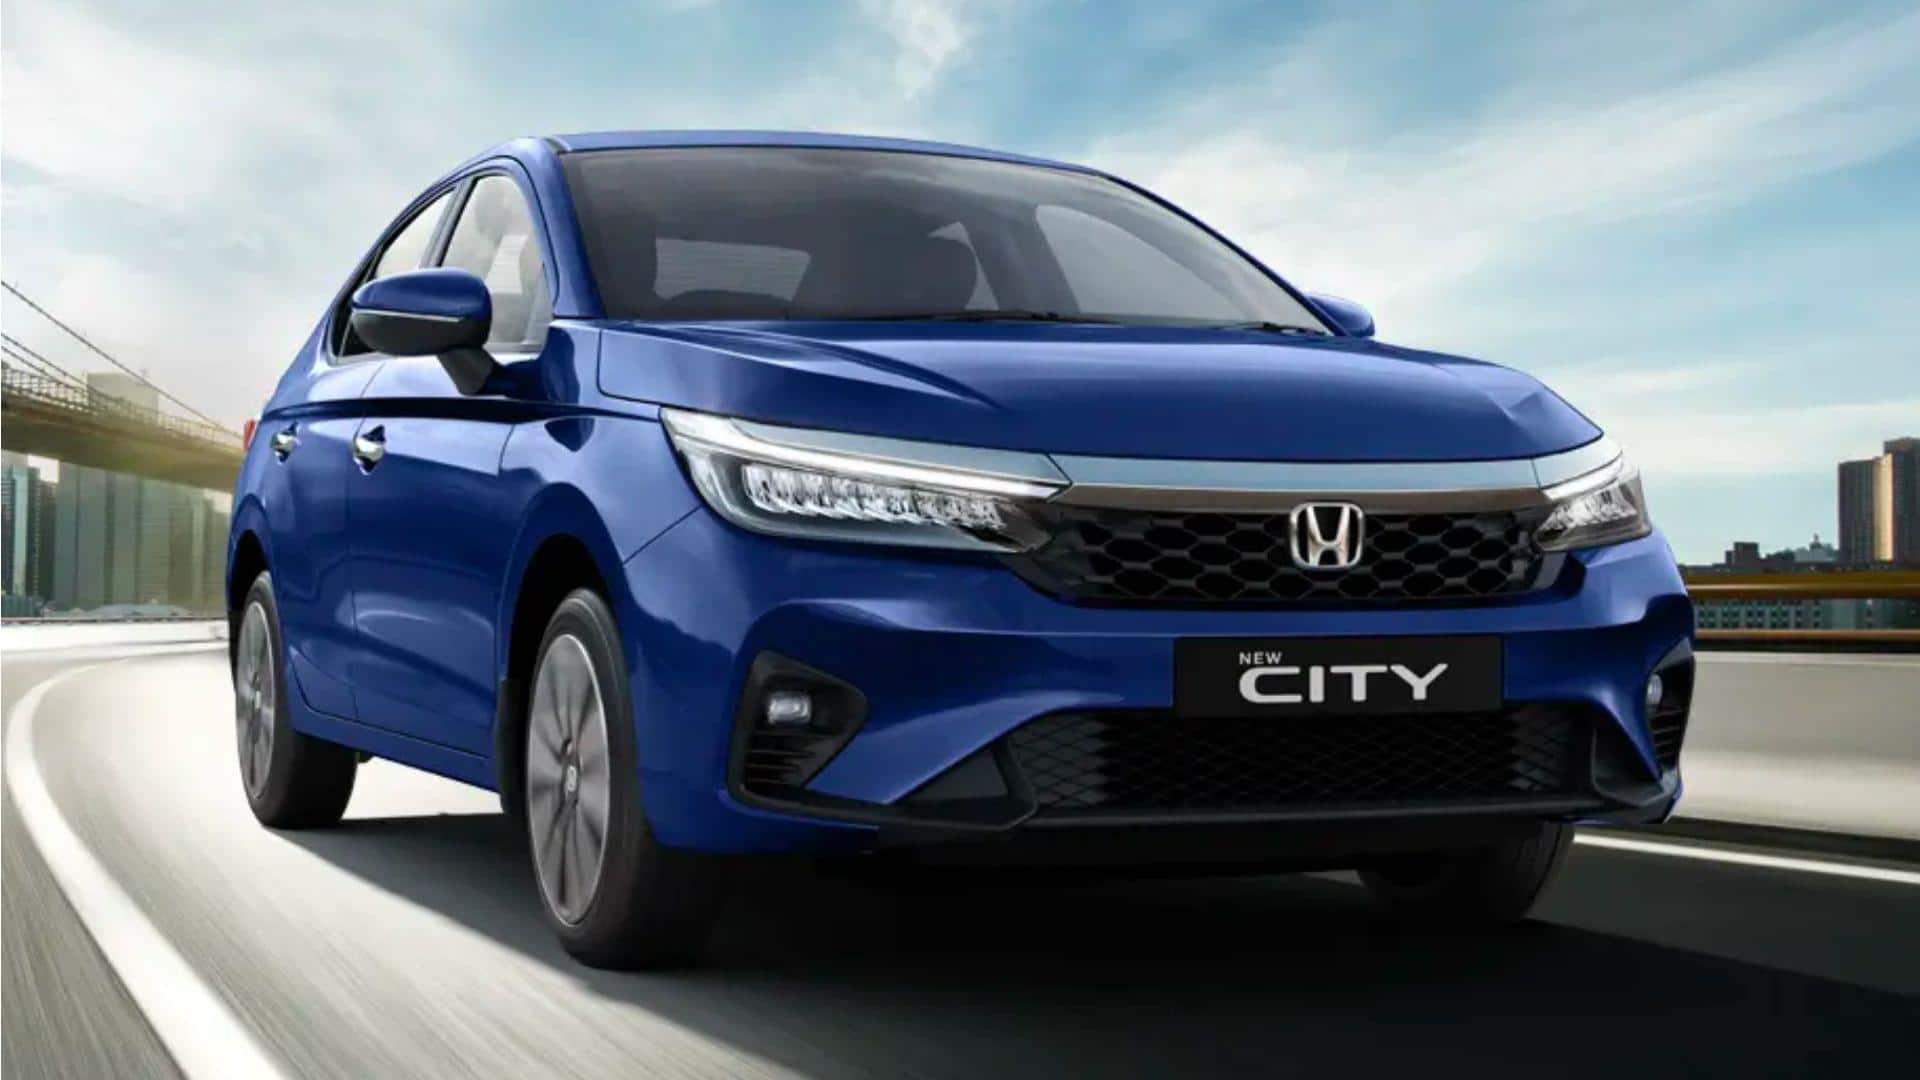 India-spec Honda City (facelift) may arrive soon with updated features